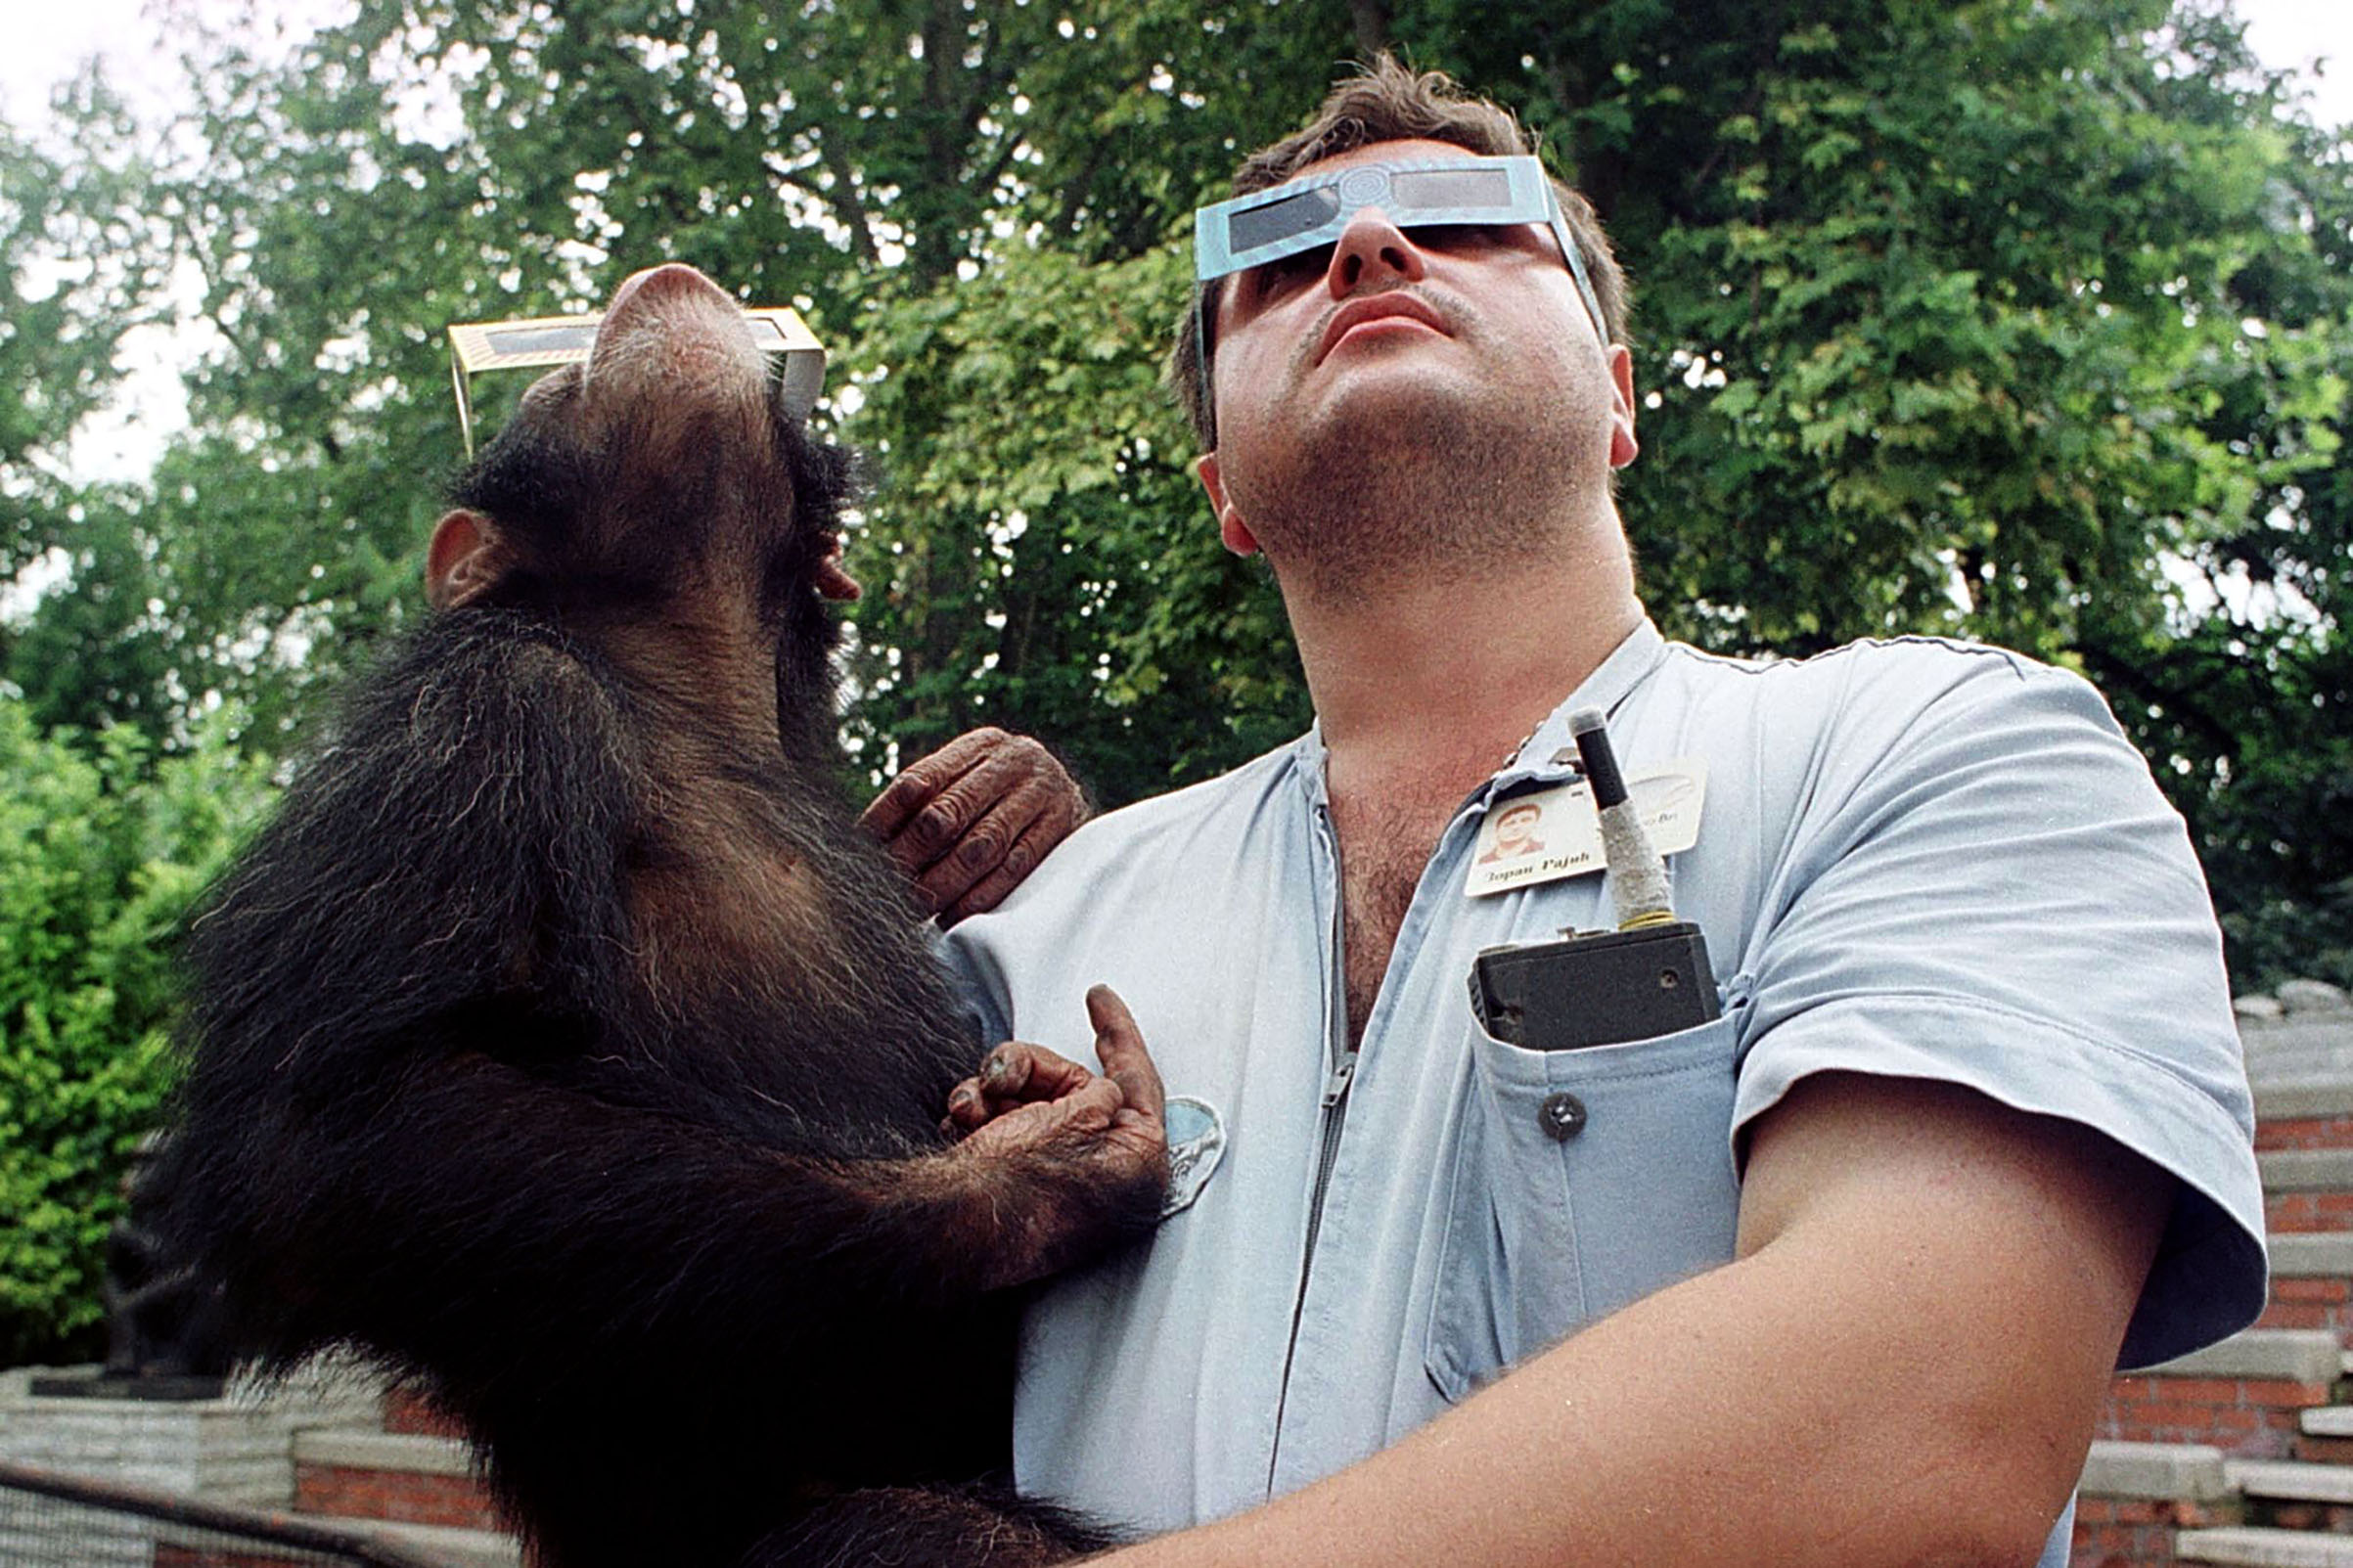 A Belgrade zookeeper holds a young chimpanzee Olgica wearing solar viewing glasses while they look up into the sky to watch the solar eclipse as it passes over the Yugoslav capital. (Reuters)